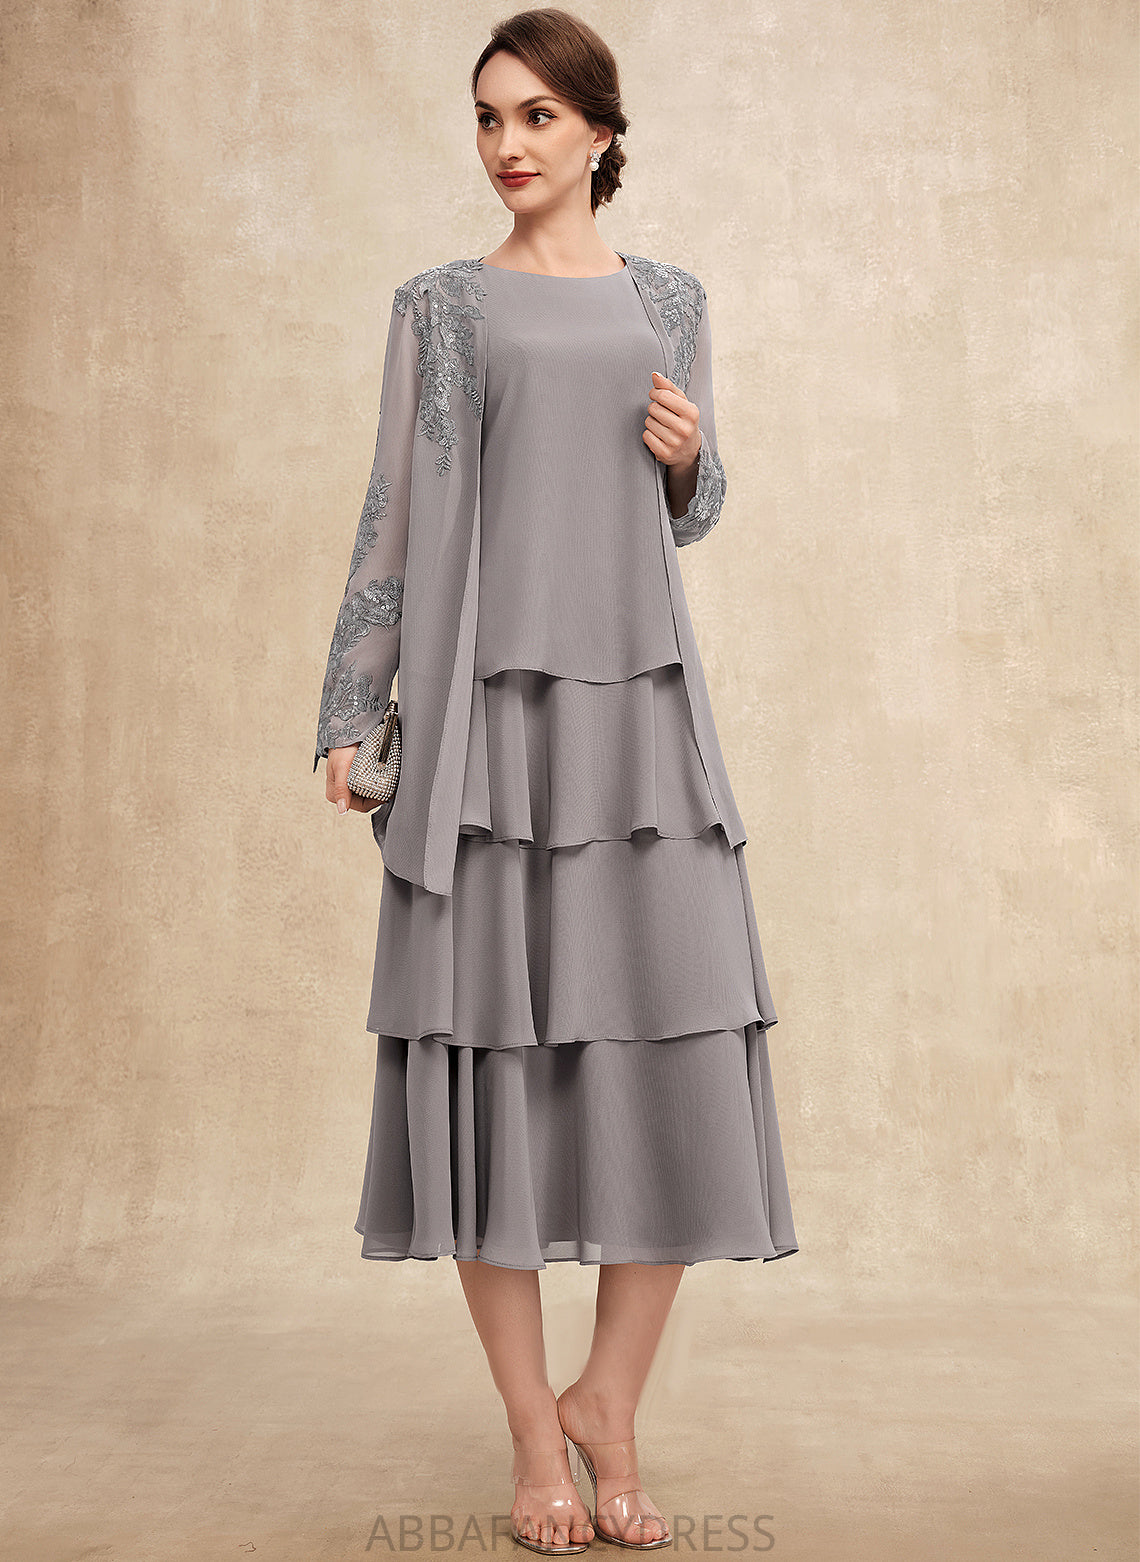 Neck Dress Bride Chiffon Mother of the Bride Dresses Ruffles Scoop Tea-Length With of the A-Line Cascading Jocelyn Mother